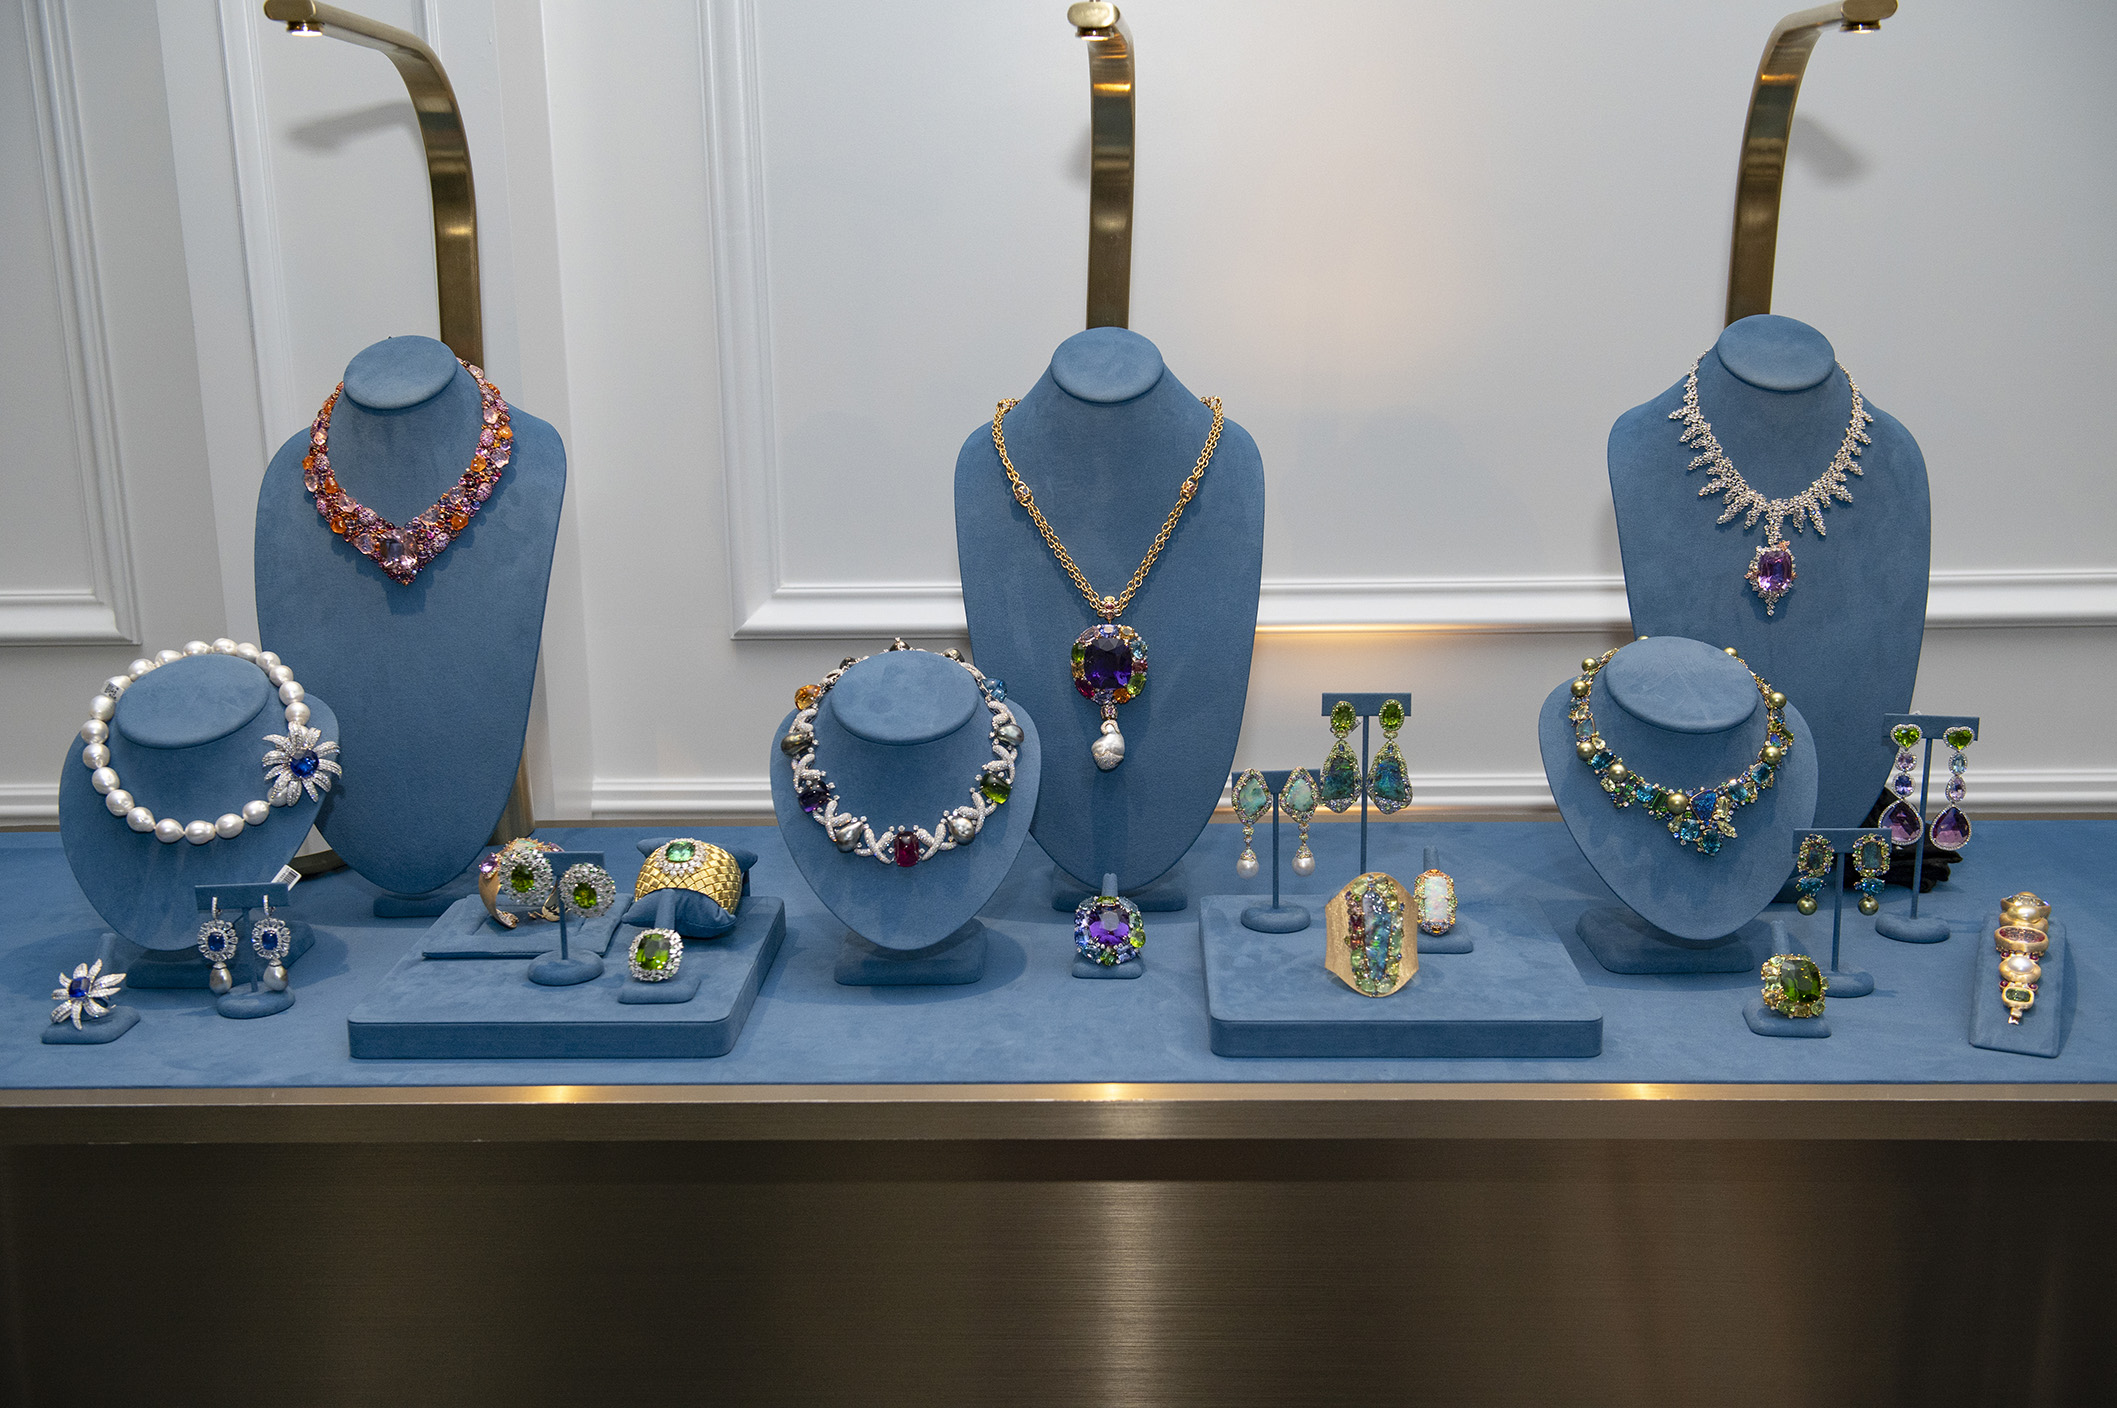 Margot McKinney display at 2023 Neiman Marcus Bejeweled Ball in Dallas